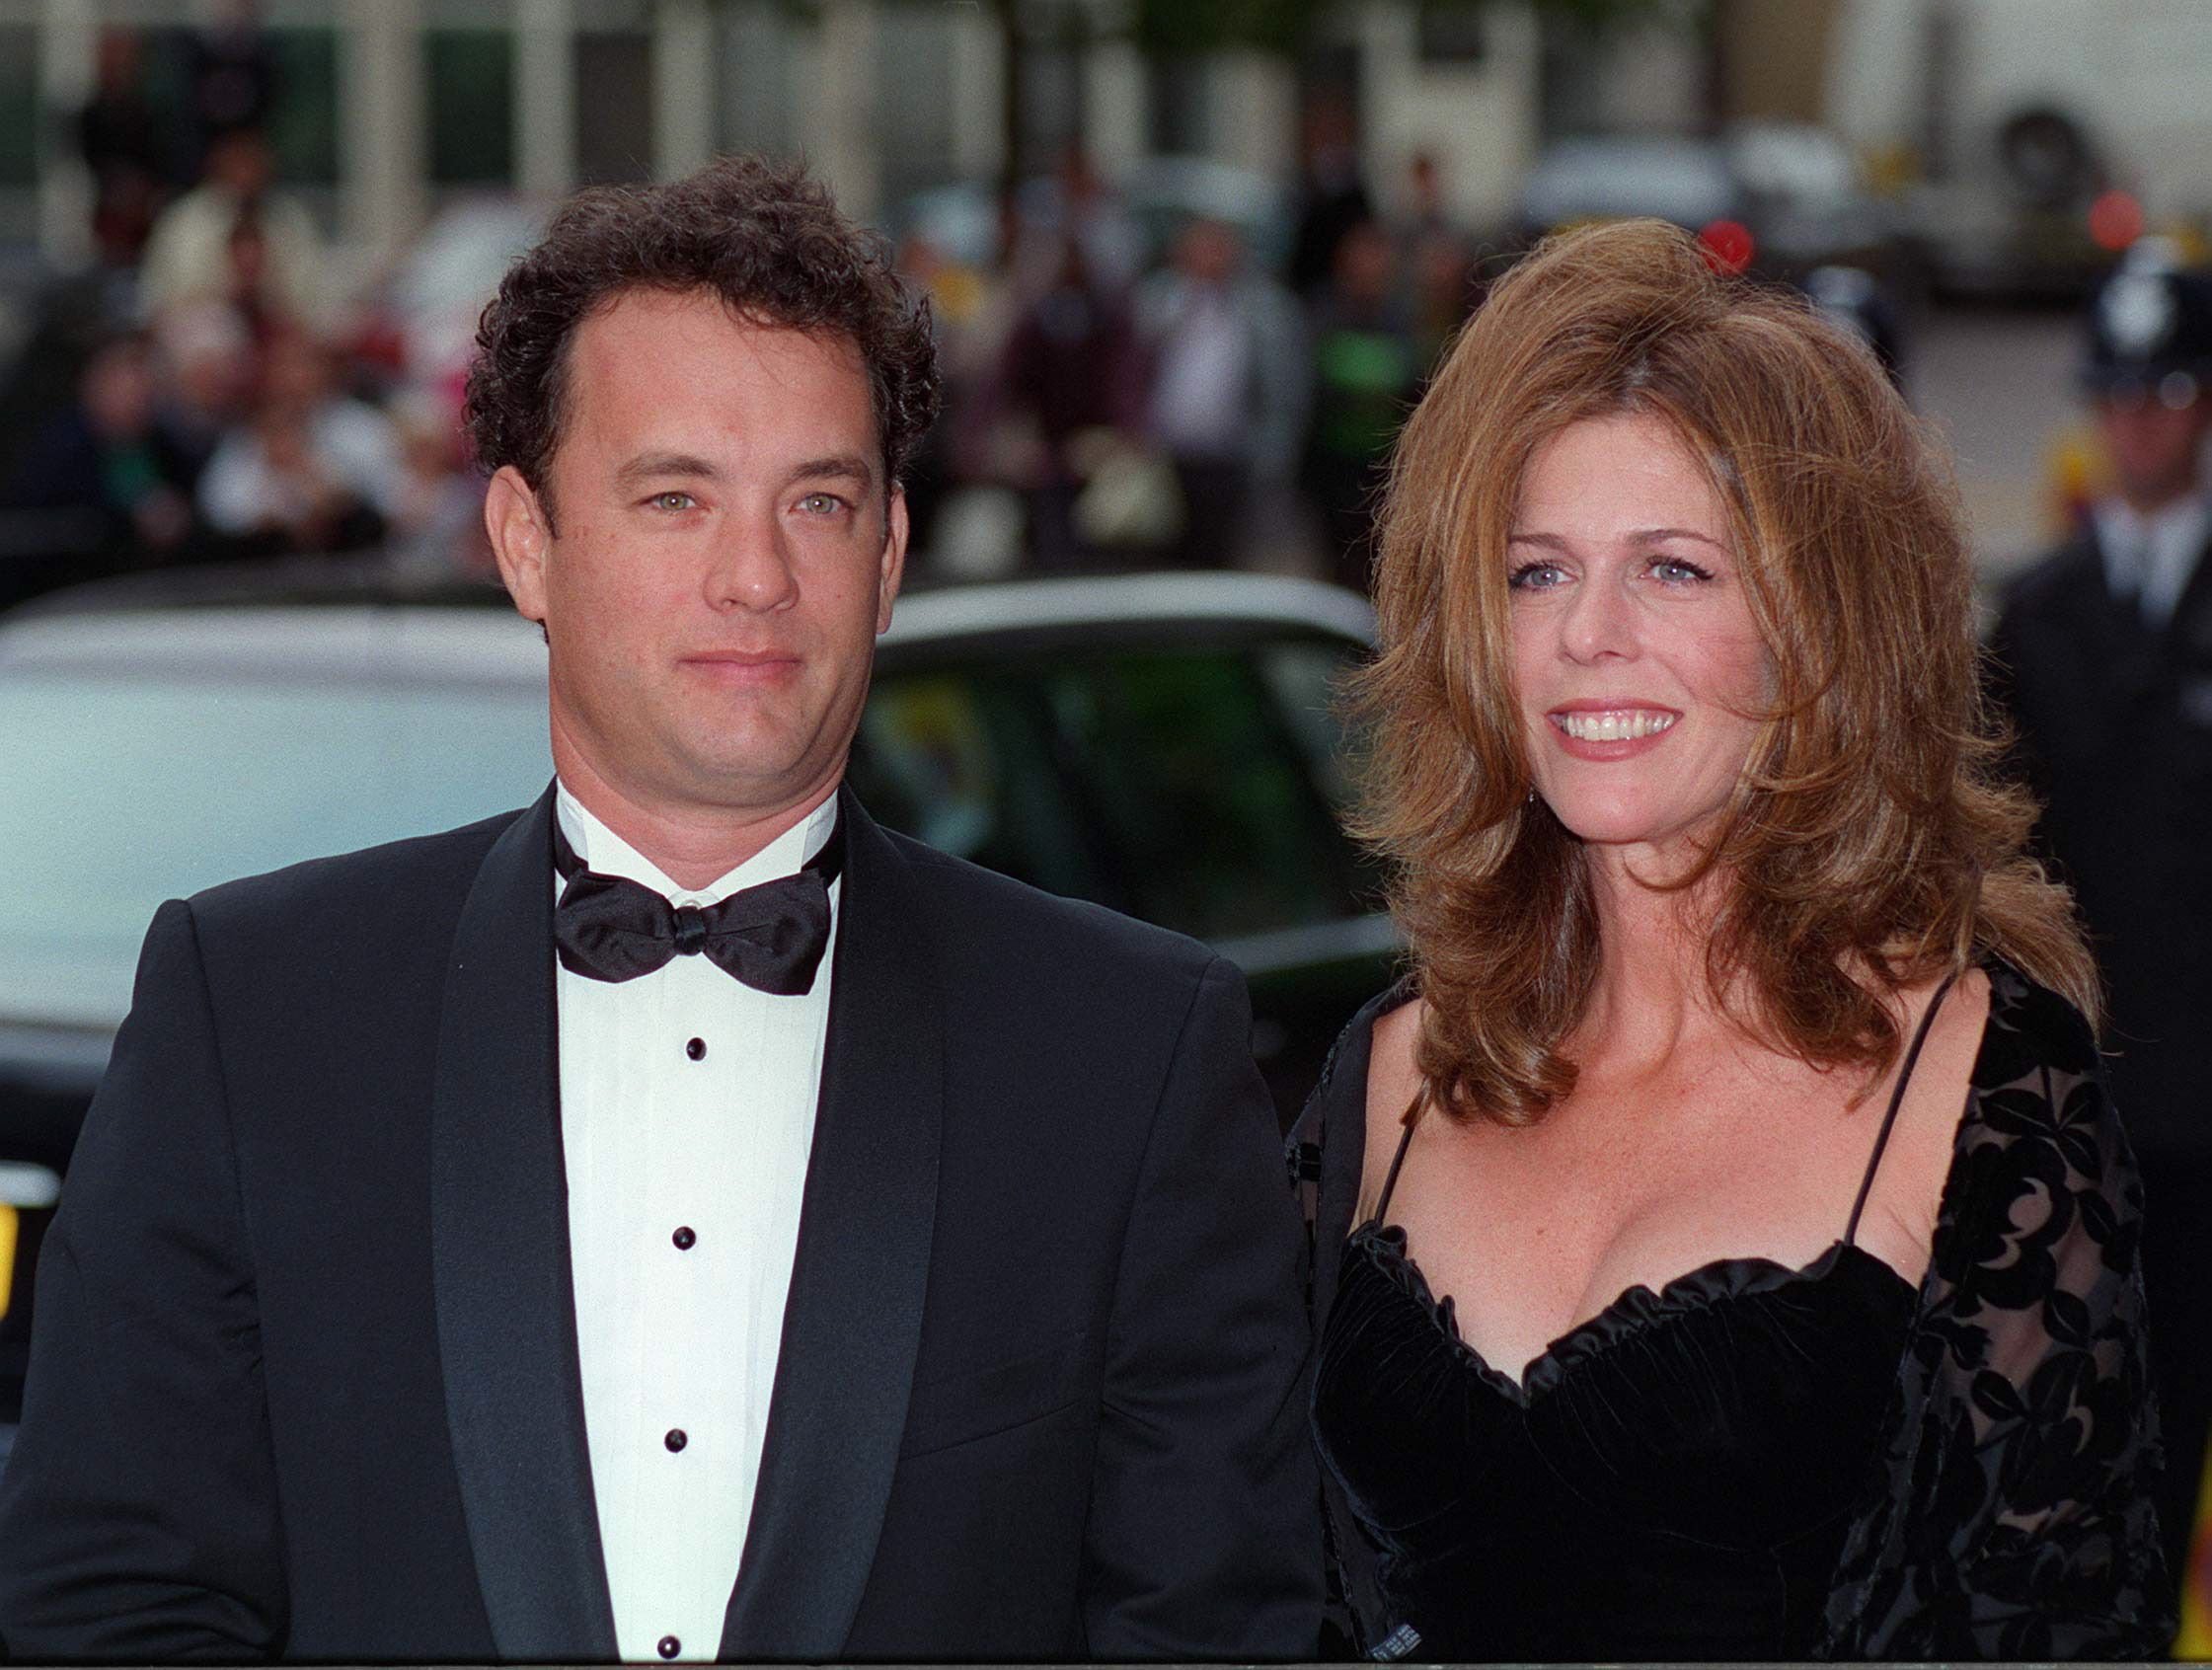 Tom Hanks and his wife, Rita Wilson, at the film preview of "Apollo 13" in London on September 7, 1995. | Photo: Getty Images